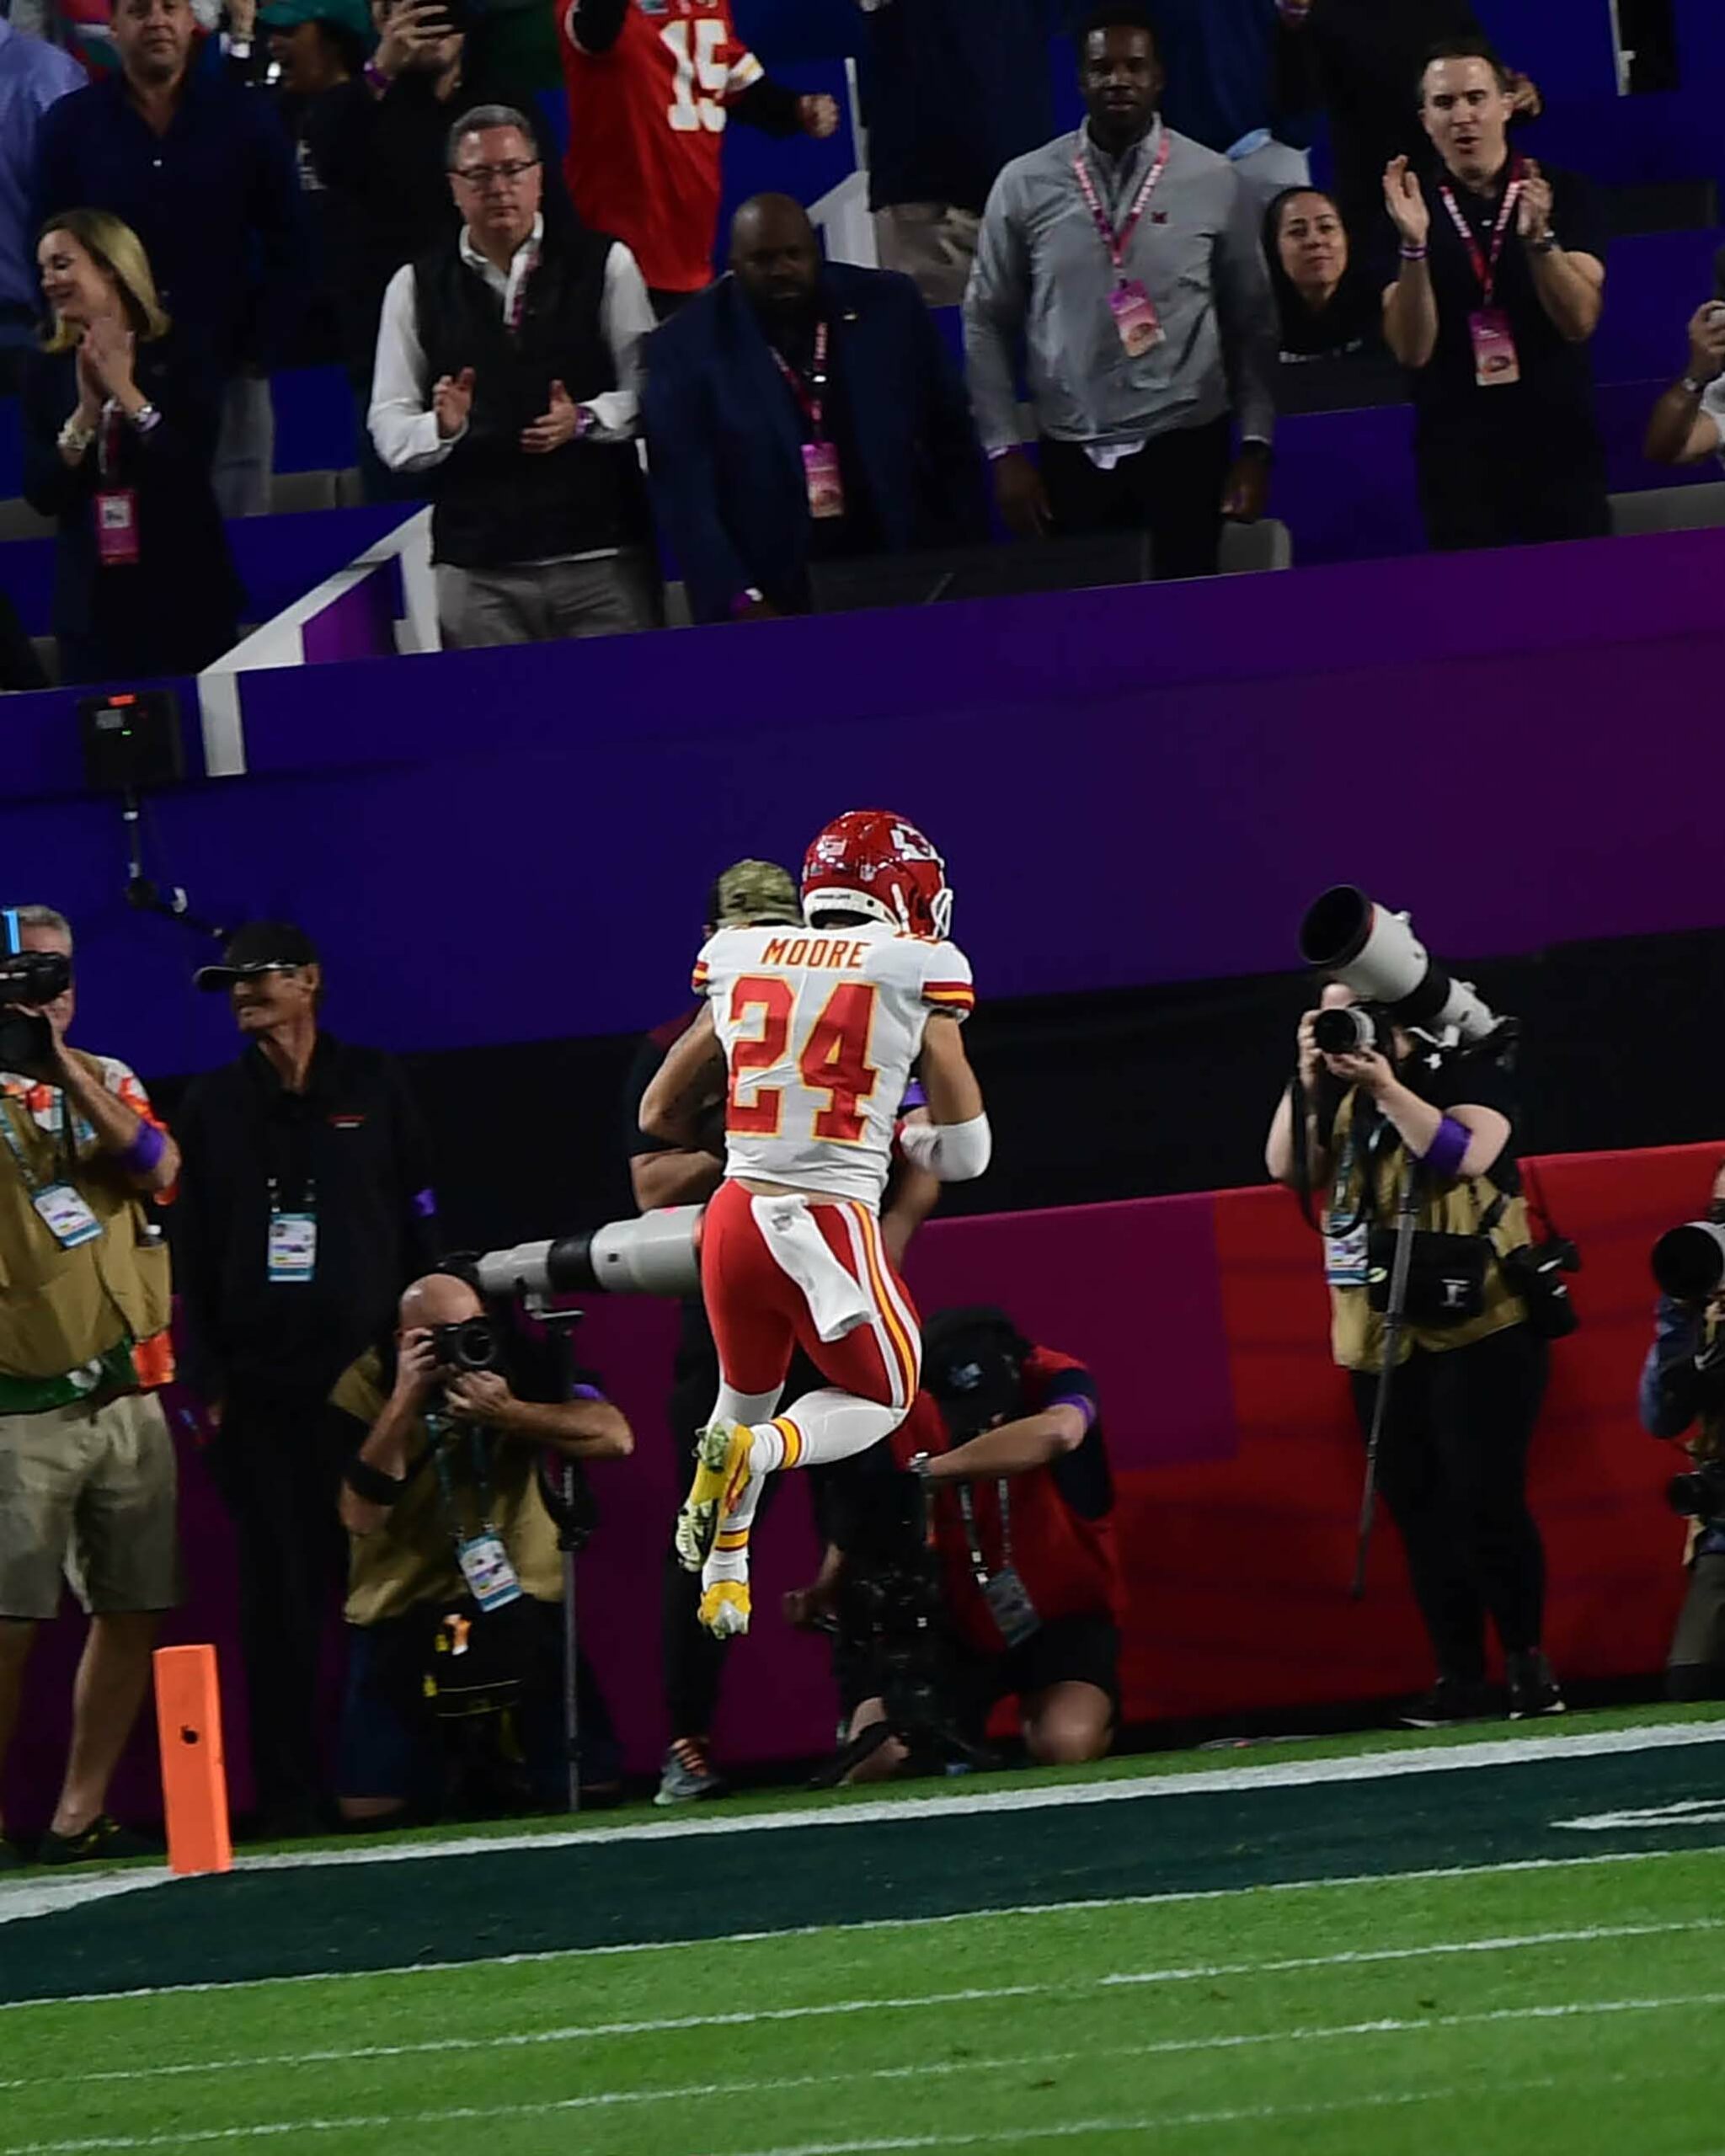 Kansas City wide receiver SKYY MOORE scores touchdown to give KC a 35-27 lead